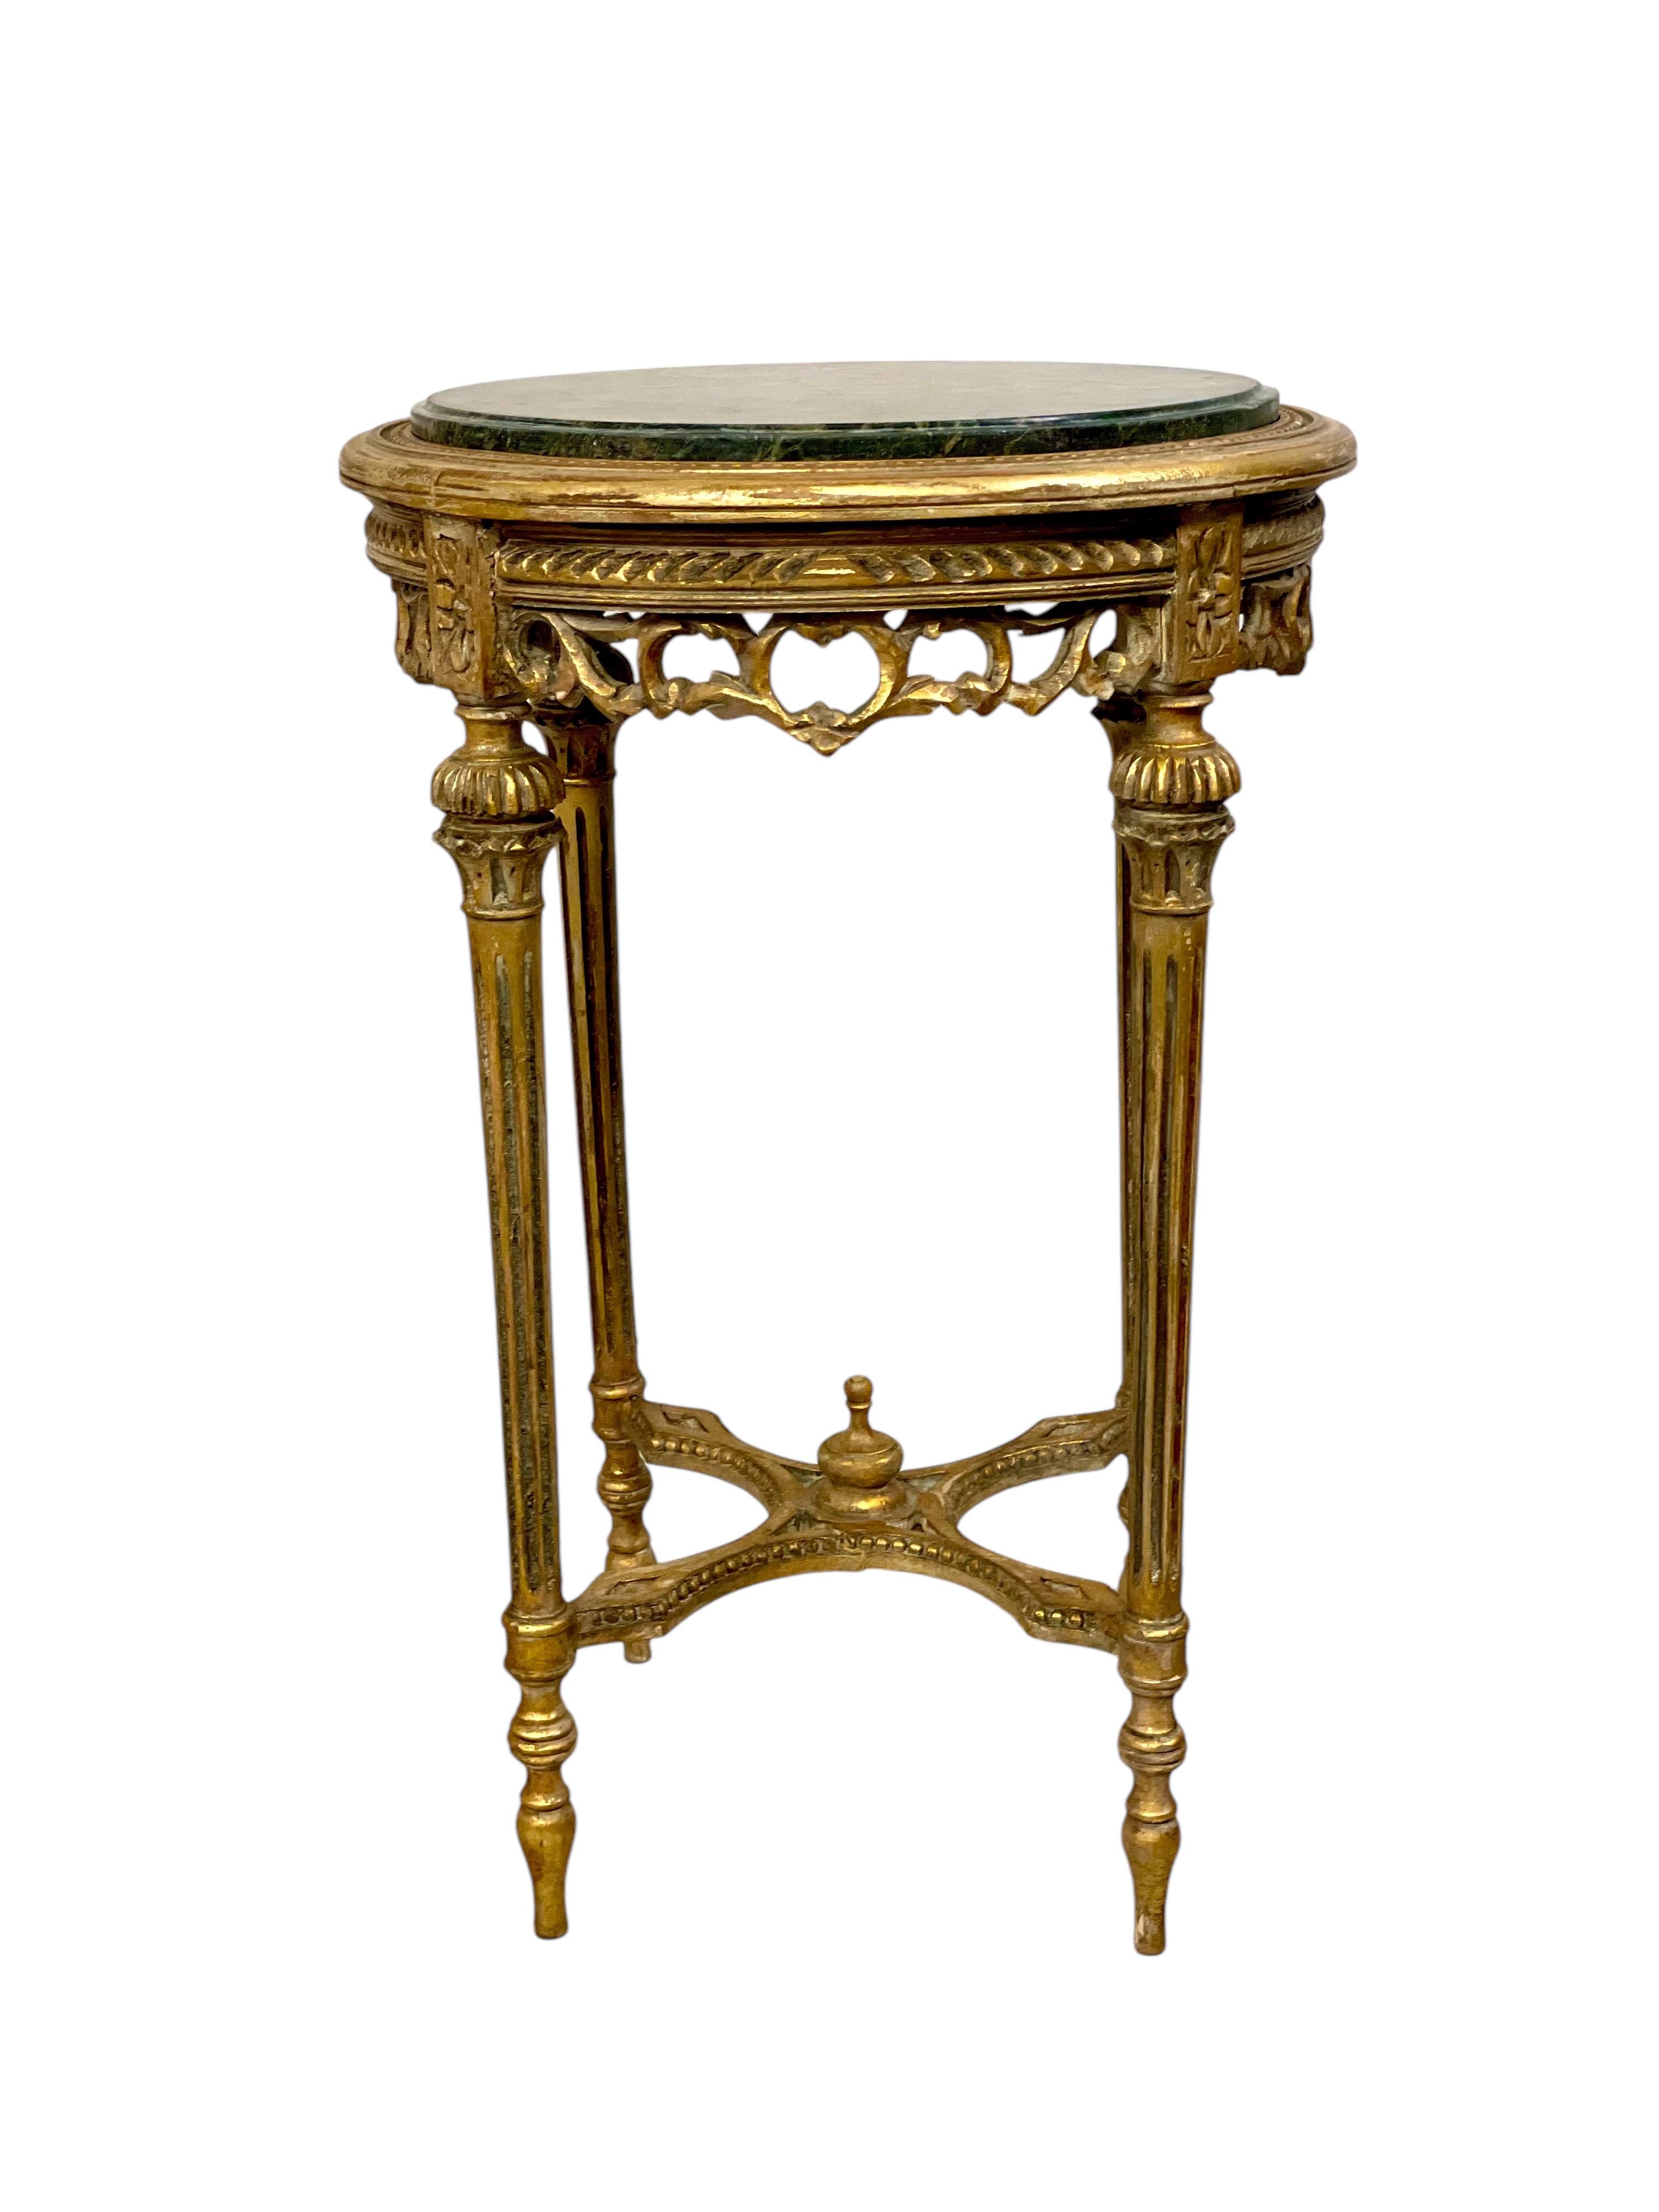 19th Century Giltwood and Green Marble Gueridon Table For Sale 4